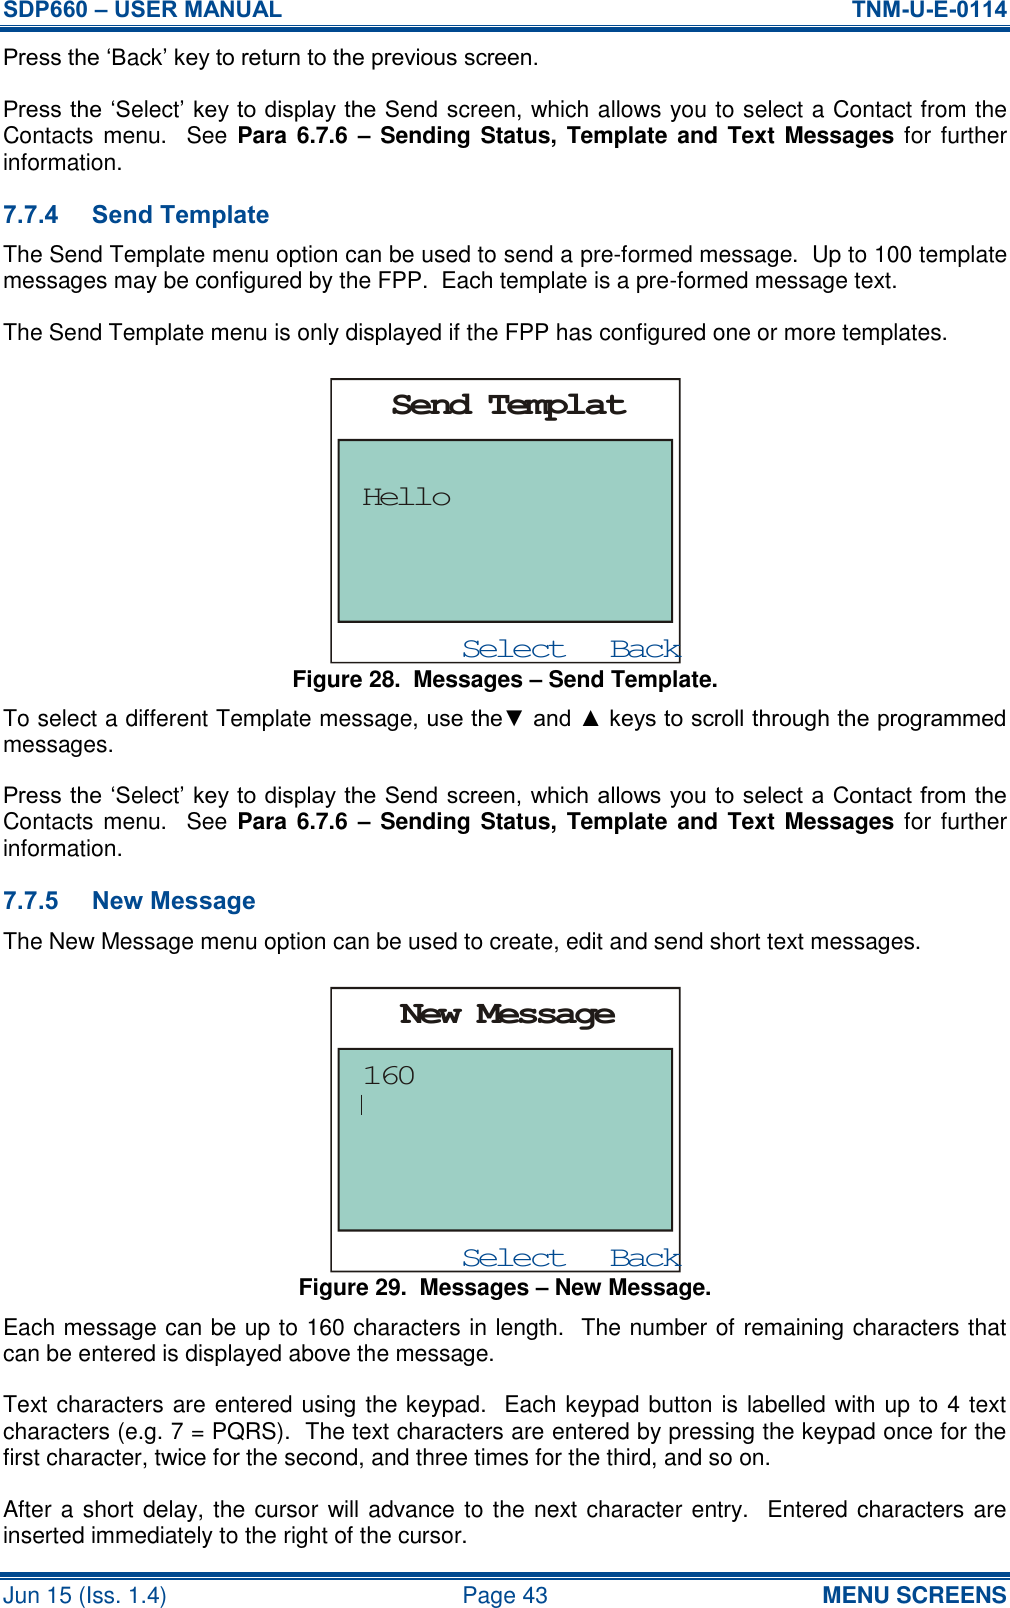 SDP660 – USER MANUAL  TNM-U-E-0114 Jun 15 (Iss. 1.4)  Page 43 MENU SCREENS Press the ‘Back’ key to return to the previous screen. Press the ‘Select’ key to display the Send screen, which allows you to select a Contact from the Contacts menu.   See Para 6.7.6 –  Sending Status, Template and Text Messages for further information. 7.7.4 Send Template The Send Template menu option can be used to send a pre-formed message.  Up to 100 template messages may be configured by the FPP.  Each template is a pre-formed message text. The Send Template menu is only displayed if the FPP has configured one or more templates. Figure 28.  Messages – Send Template. To select a different Template message, use the▼ and ▲ keys to scroll through the programmed messages. Press the ‘Select’ key to display the Send screen, which allows you to select a Contact from the Contacts menu.   See Para 6.7.6 –  Sending Status, Template and Text Messages for further information. 7.7.5 New Message The New Message menu option can be used to create, edit and send short text messages. Figure 29.  Messages – New Message. Each message can be up to 160 characters in length.  The number of remaining characters that can be entered is displayed above the message. Text characters are entered using the keypad.  Each keypad button is labelled with up to 4 text characters (e.g. 7 = PQRS).  The text characters are entered by pressing the keypad once for the first character, twice for the second, and three times for the third, and so on. After a short delay, the cursor will advance to the next character entry.  Entered characters are inserted immediately to the right of the cursor. BackSelectSend TemplatHelloBackSelectNew Message160